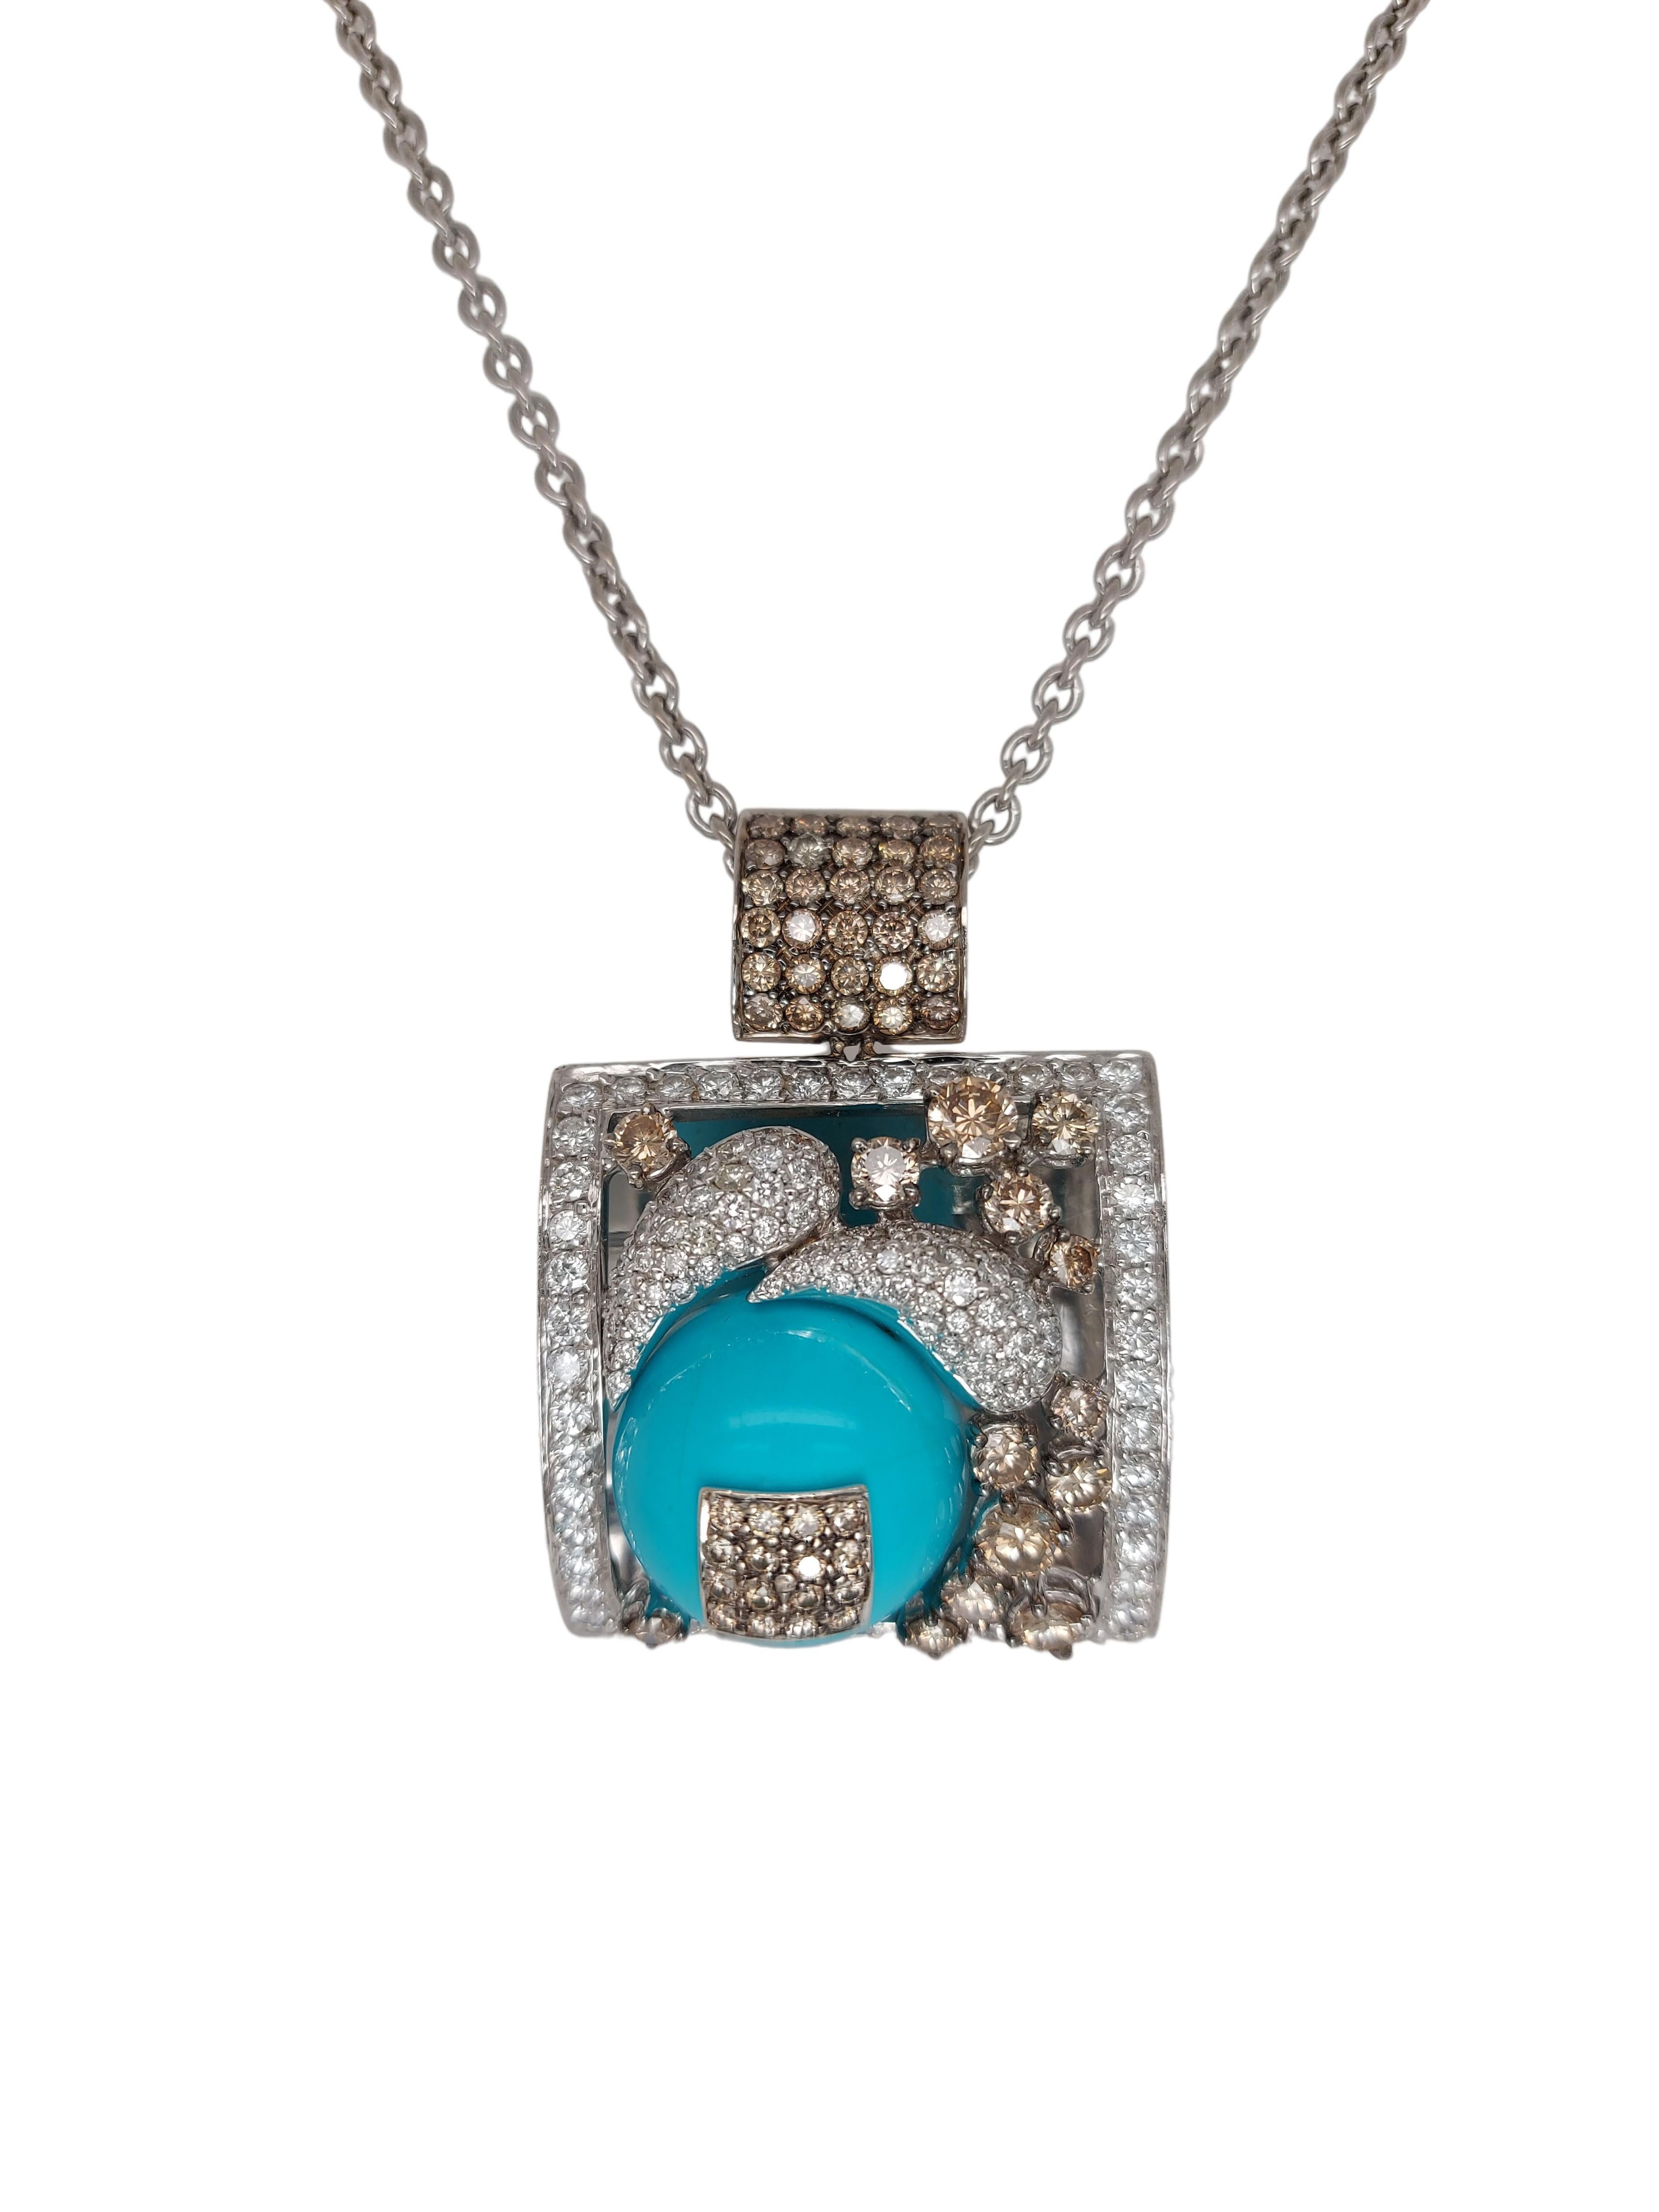 Stunning 18kt White Gold Pendant / Necklace with Turquoise and Diamonds 1